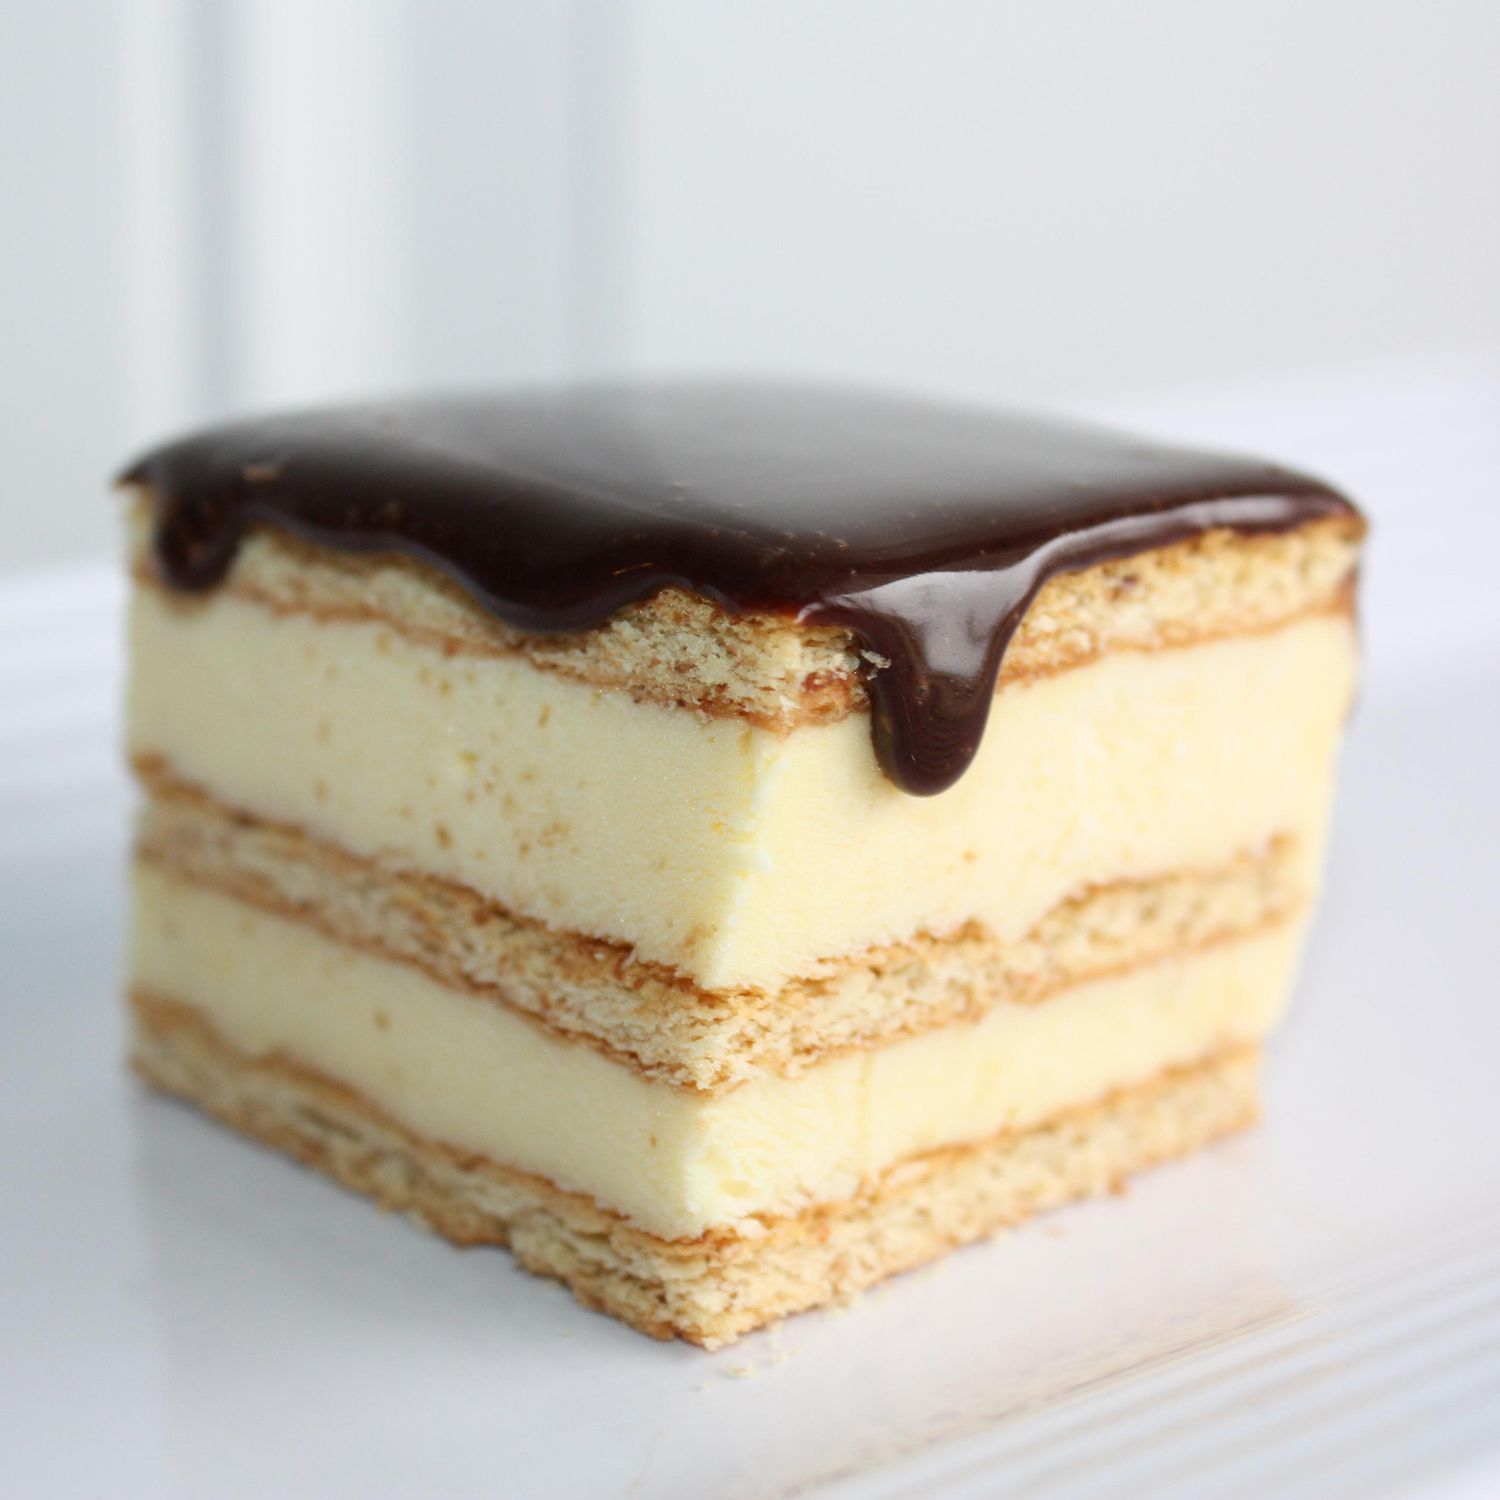 close up view of a slice of Chocolate Eclair Cake